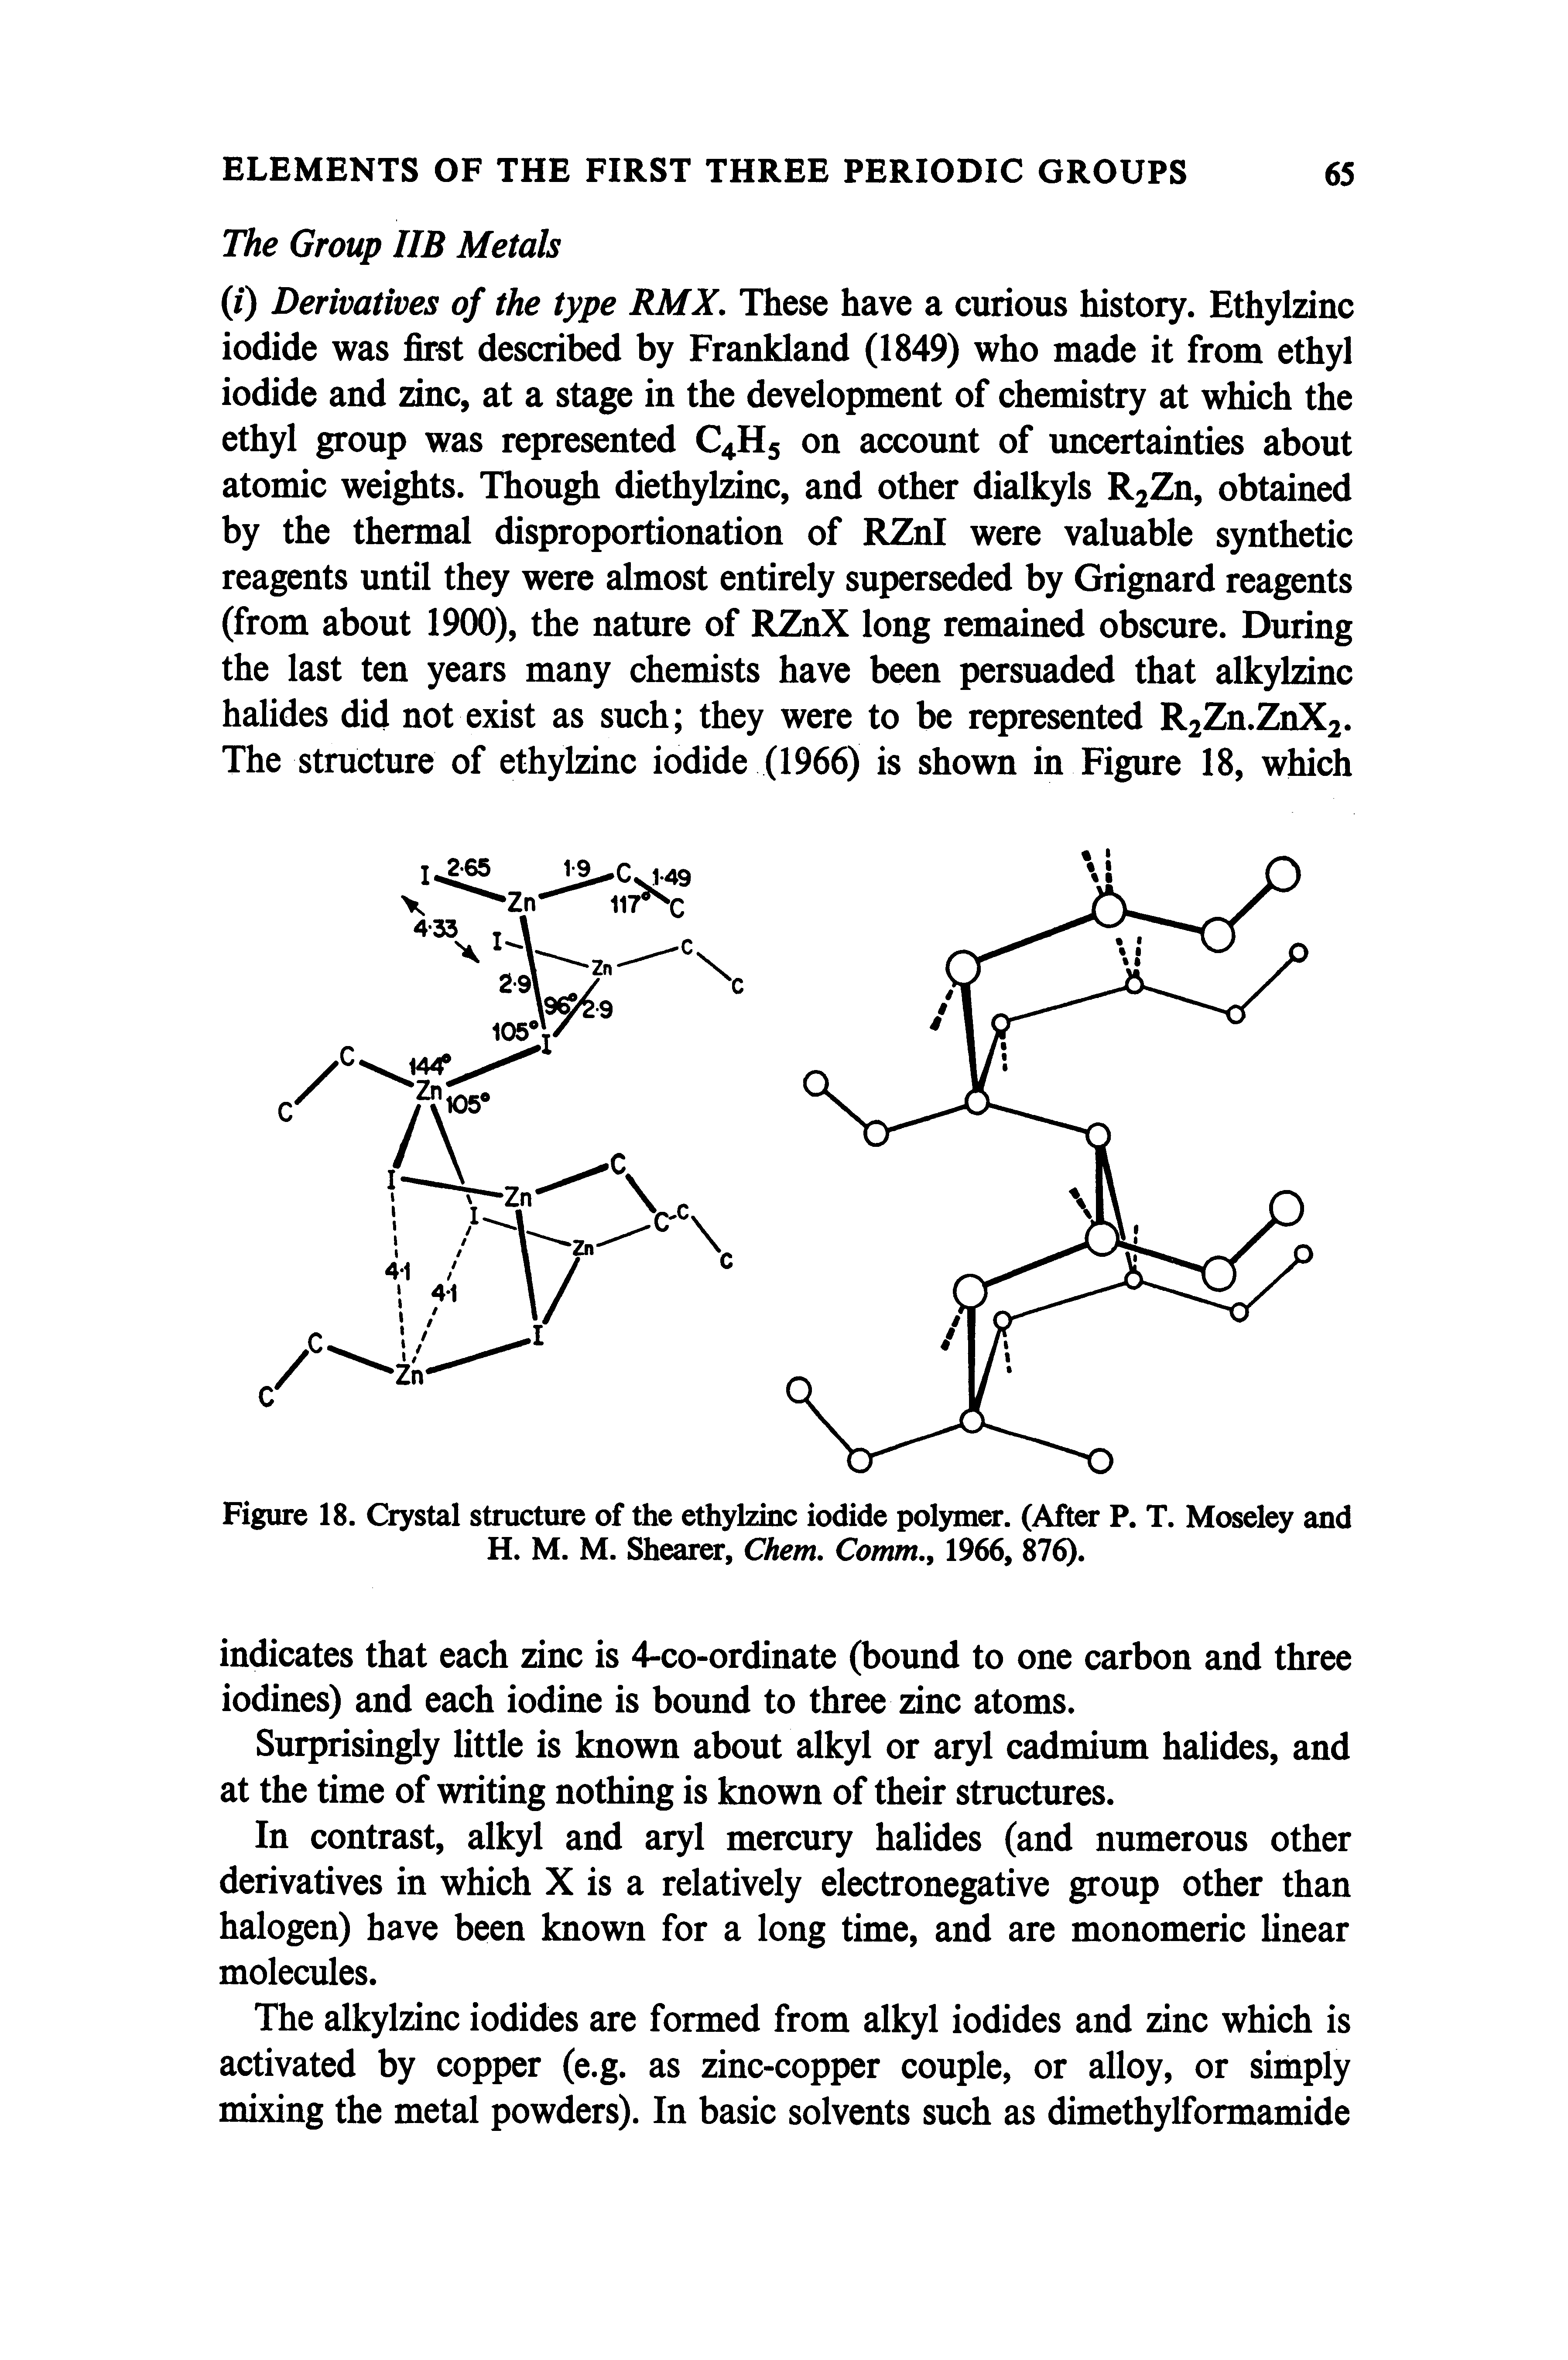 Figure 18. Crystal structure of the ethylzinc iodide polymor. (After P. T. Moseley and H. M. M. Shearer, Chem. Comm., 1966, 876).